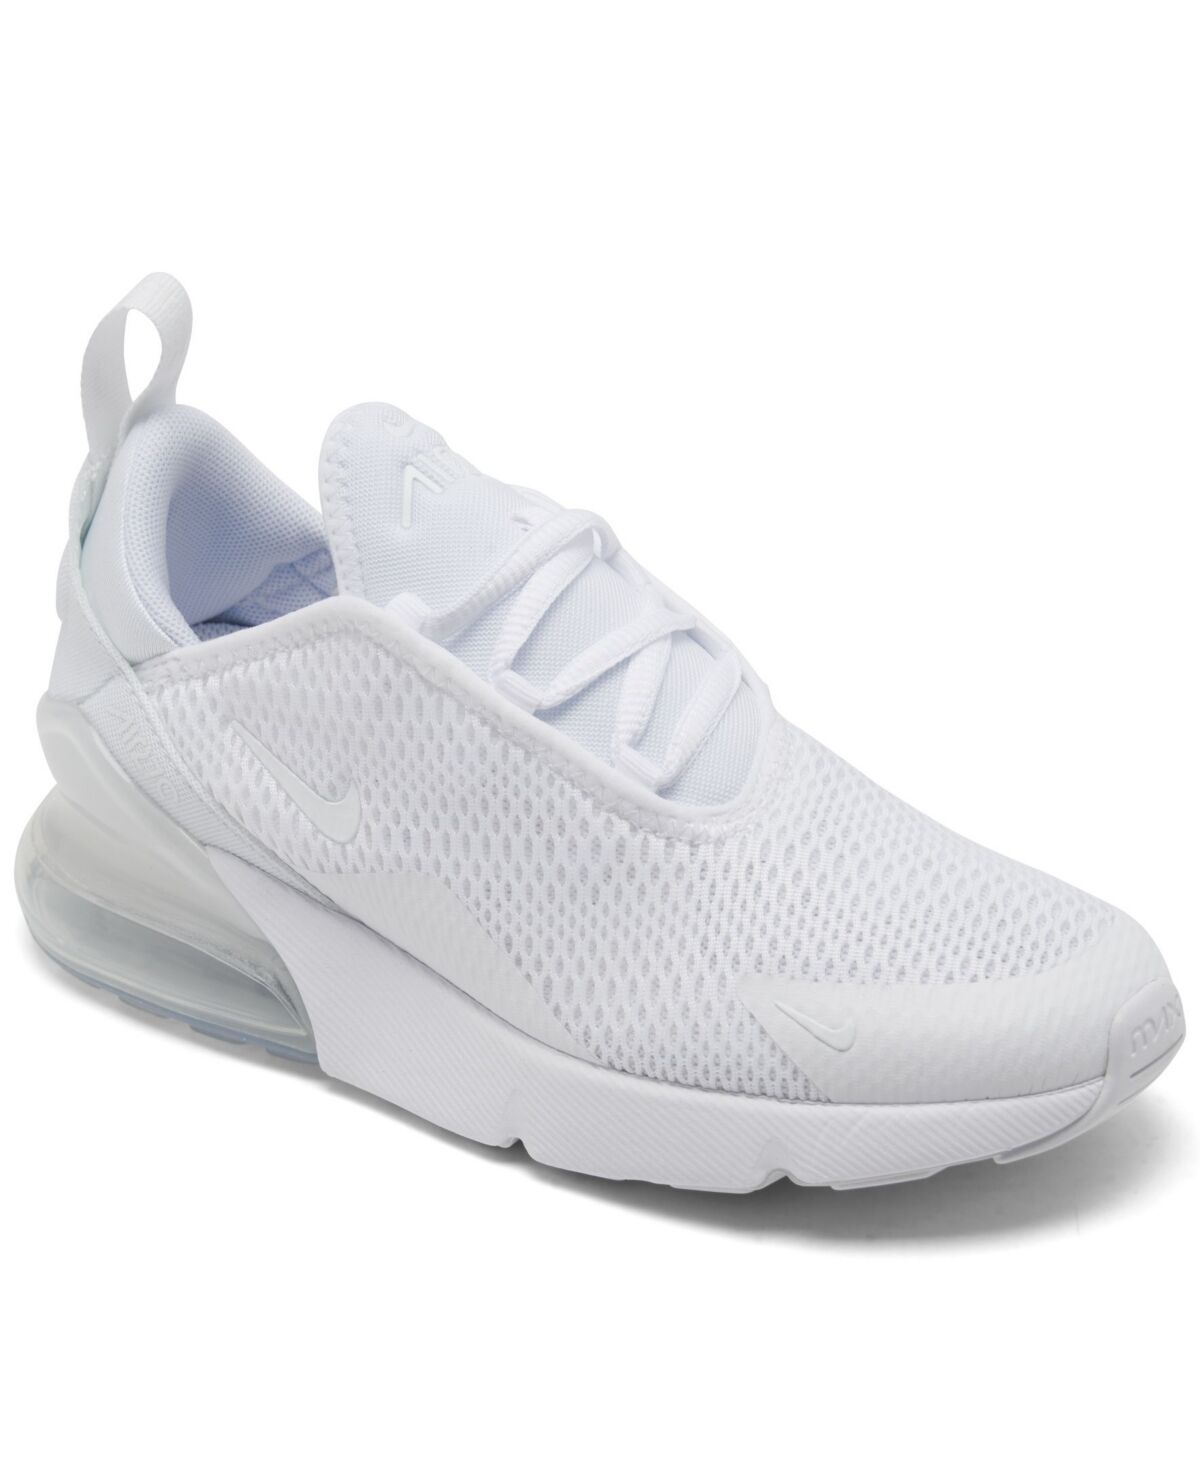 Nike Little Girls and Boys Air Max 270 Casual Sneakers from Finish Line - White, Metallic Silver Tone